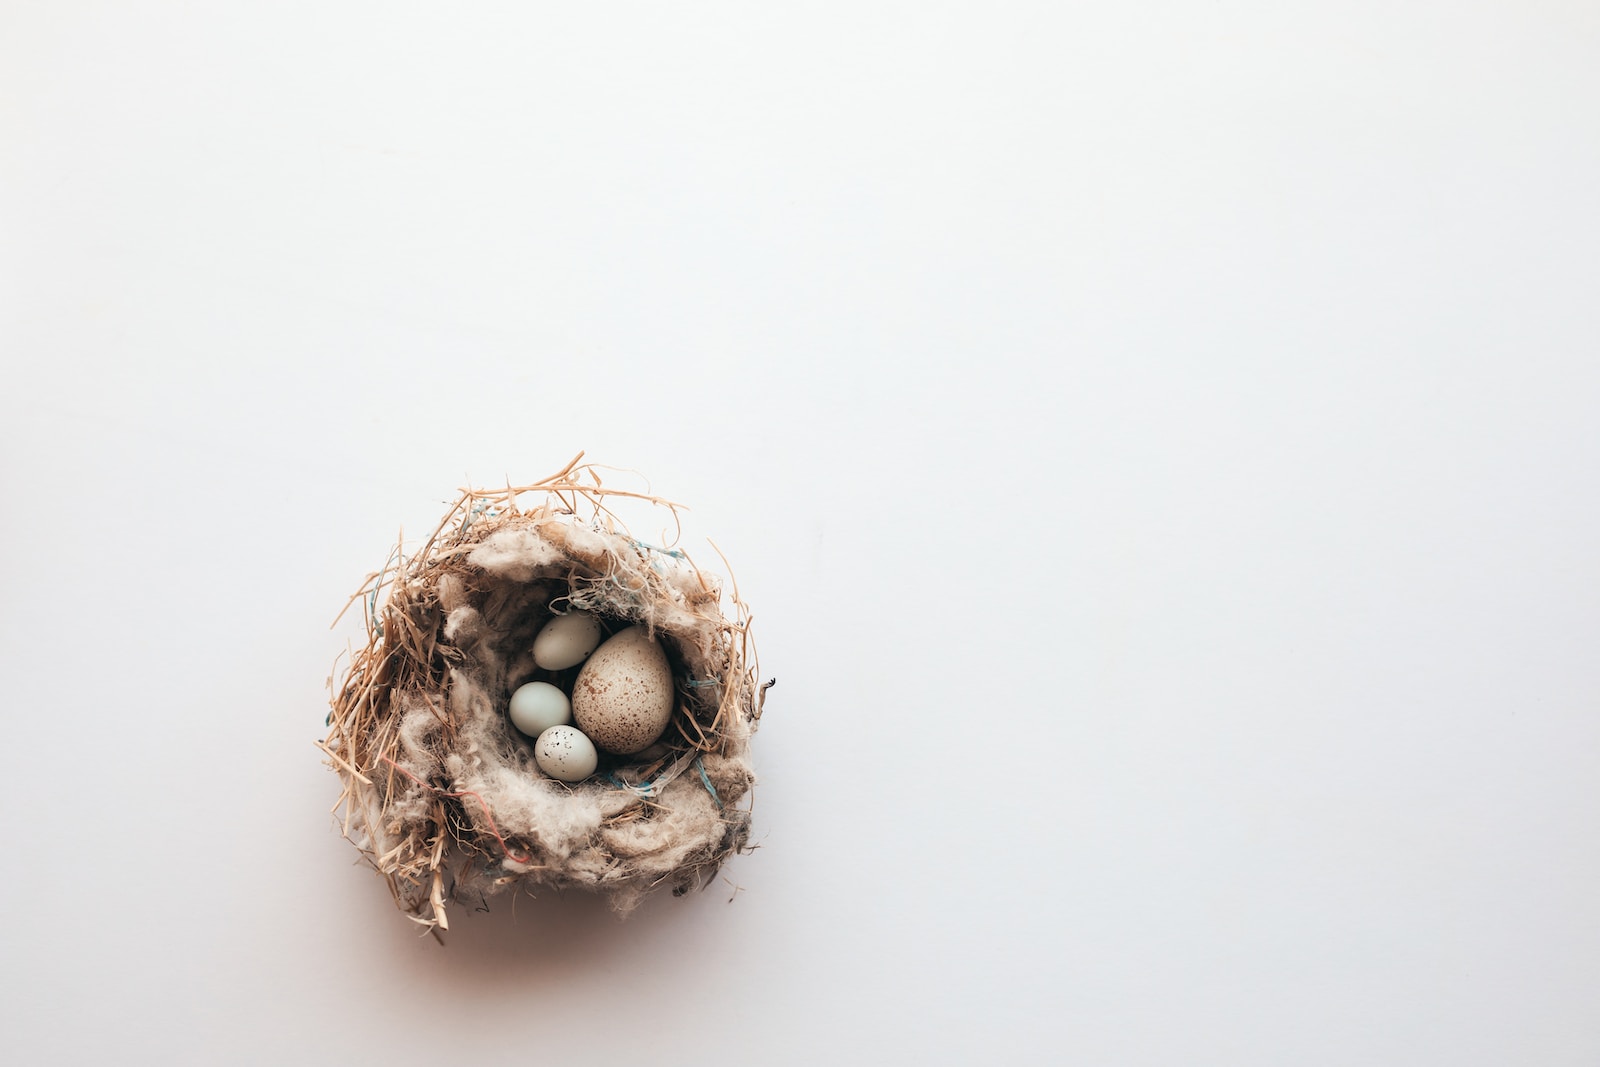 a bird's nest with three eggs in it